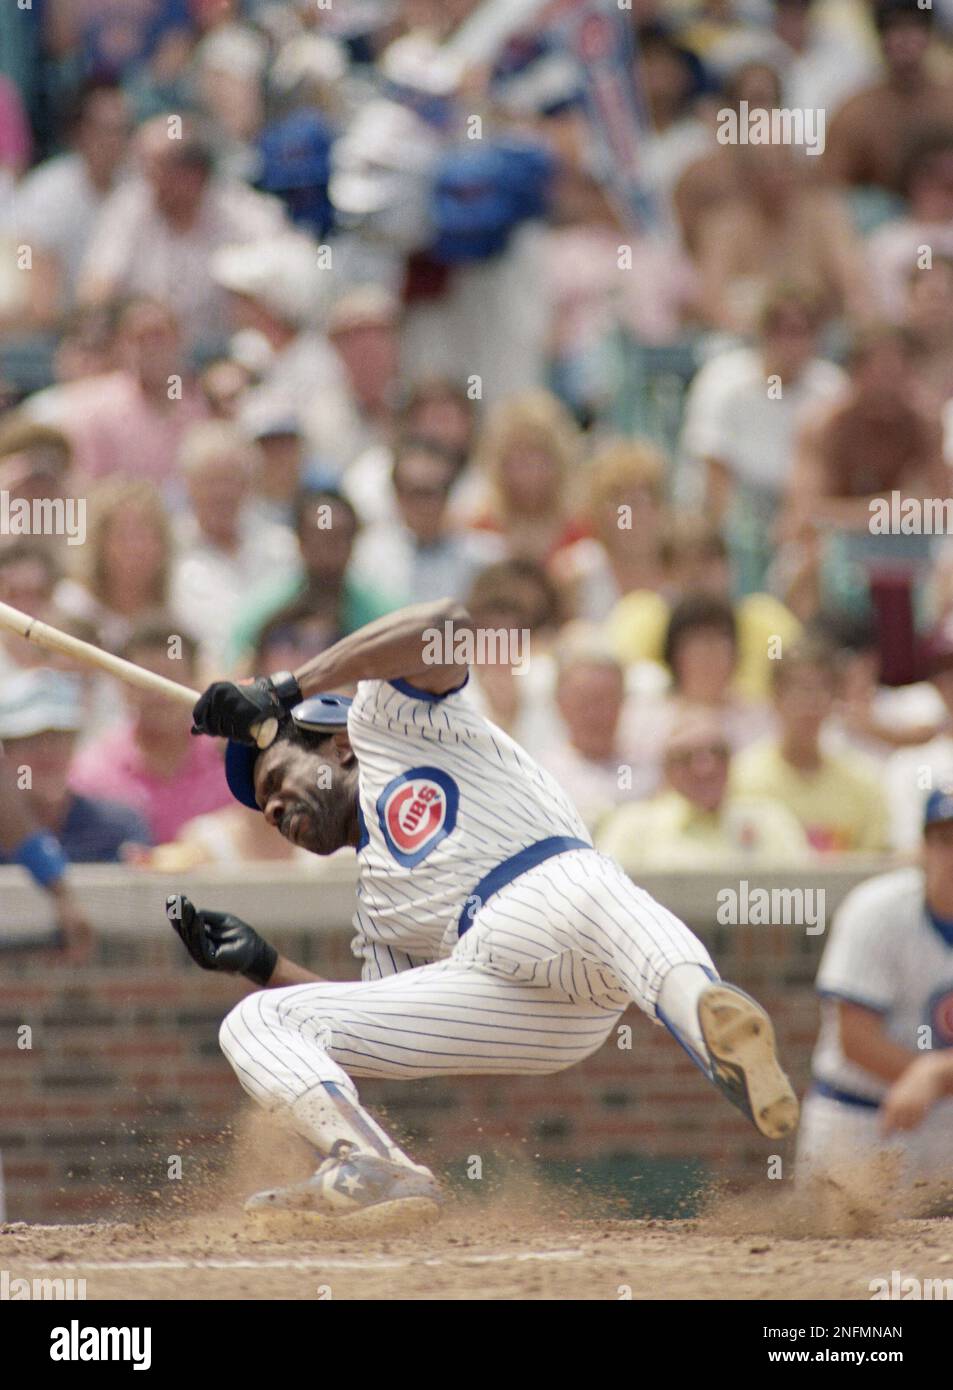 Chicago Cubs' Andre Dawson goes down after being hit in the face